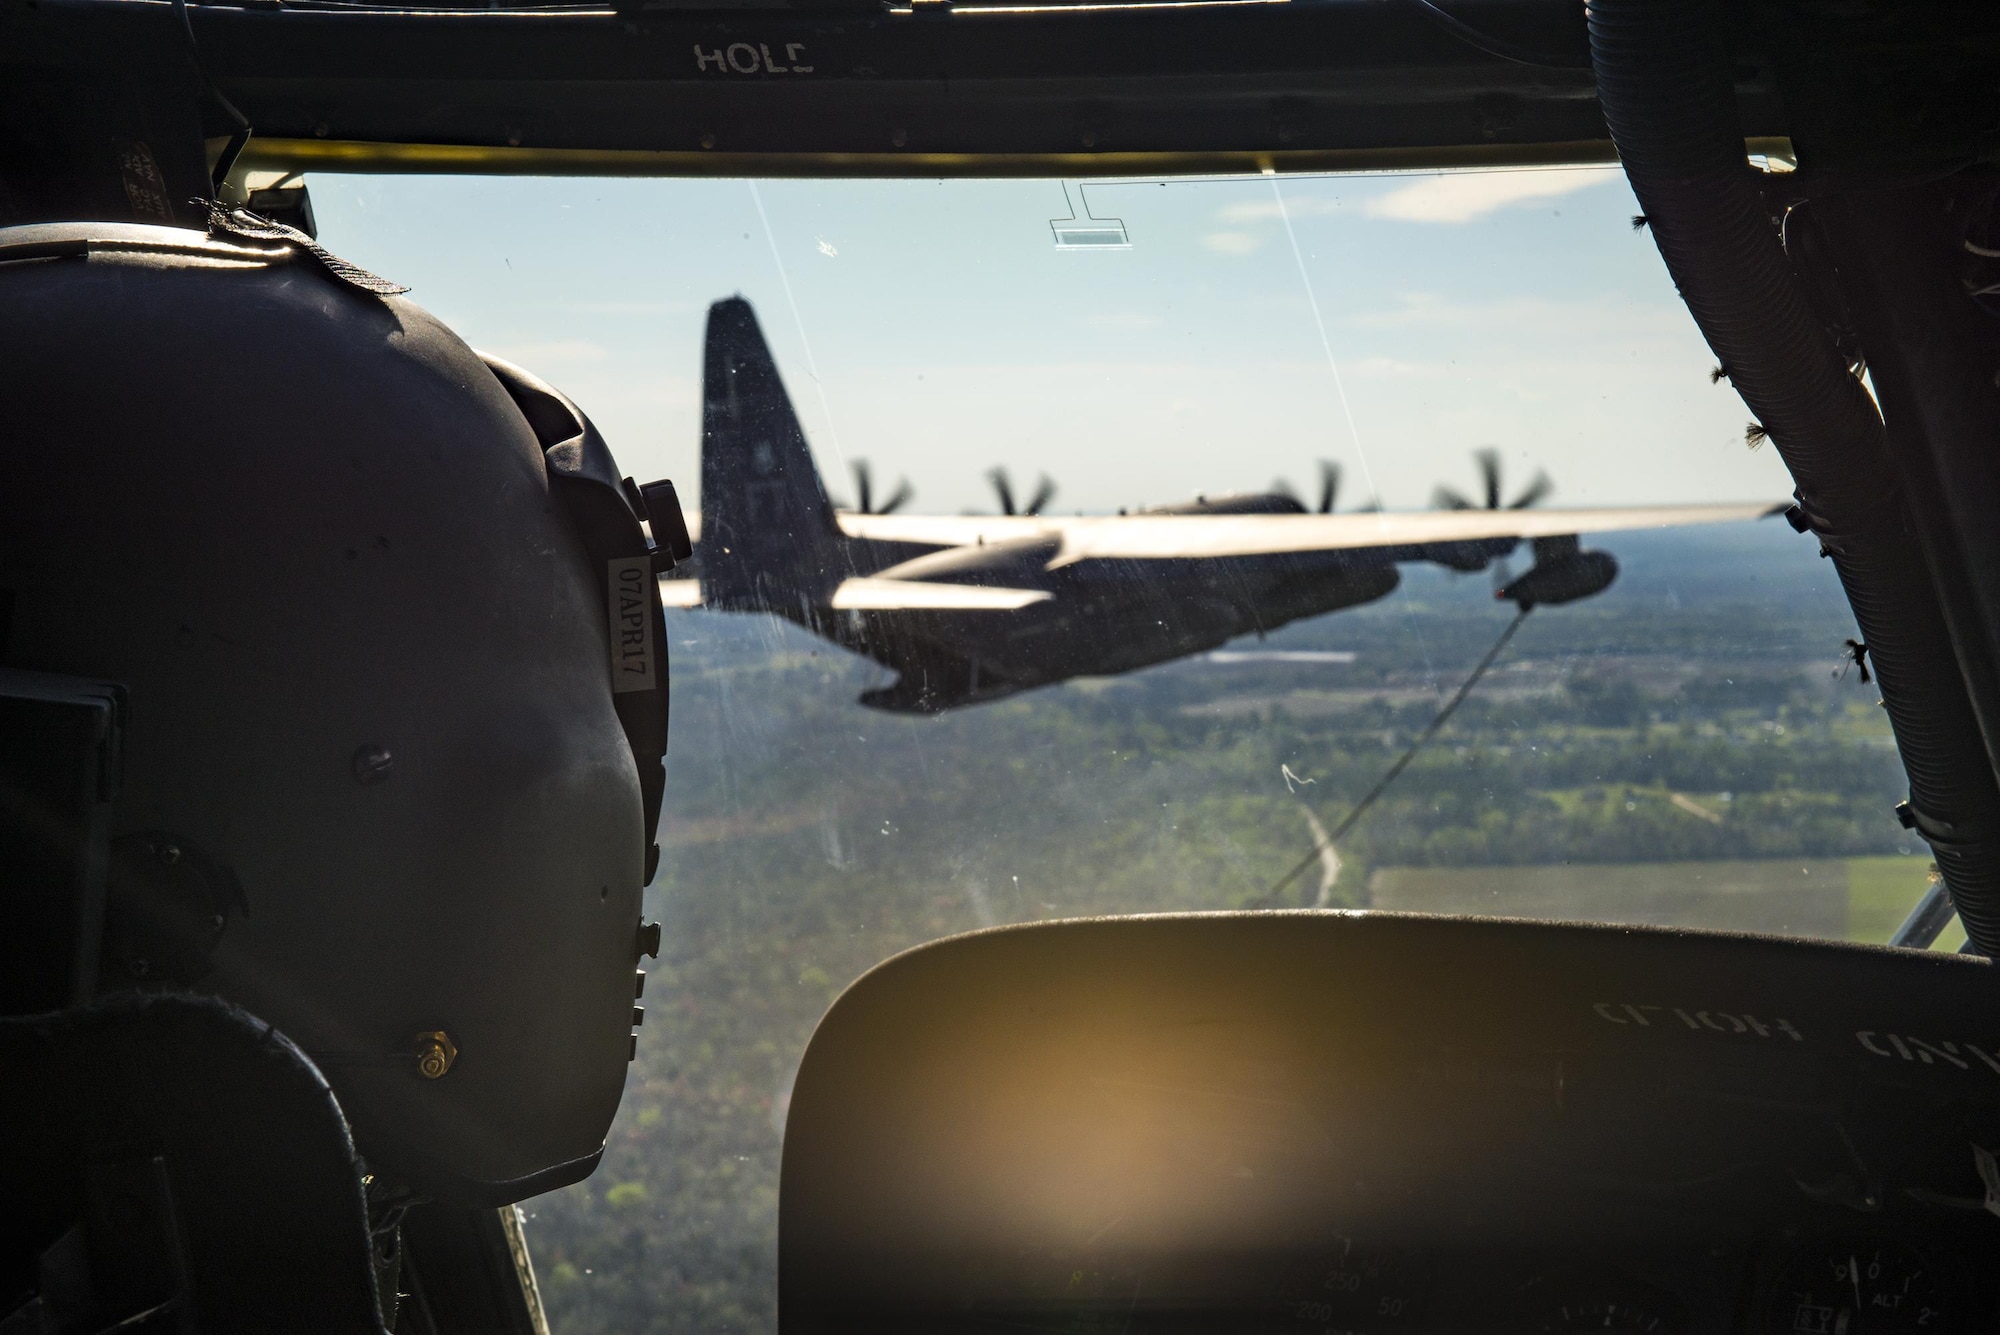 An HH-60G Pave Hawk pilot from the 41st Rescue Squadron flies towards an HC-130J Combat King II as part of a refueling demonstration during the 75th Anniversary Flying Tiger Reunion, March 10, 2017, at Moody Air Force Base, Ga. In 1941, President Roosevelt signed an executive order forming the American Volunteer Group. The AVG was organized into the 1st, 2nd, and 3rd Pursuit Squadrons and later disbanded and replaced by the 23d Fighter Group in 1942. Under the command of Gen. Claire Chennault, the Flying Tigers comprised of the 74th, 75th, and 76th Pursuit Squadrons defended China against the Japanese. Throughout World War II, the Flying Tigers achieved combat success and flew the US-made Curtiss P-40 Warhawks painted with the shark-mouth design. (U.S. Air Force photo by Staff Sgt. Ryan Callaghan)